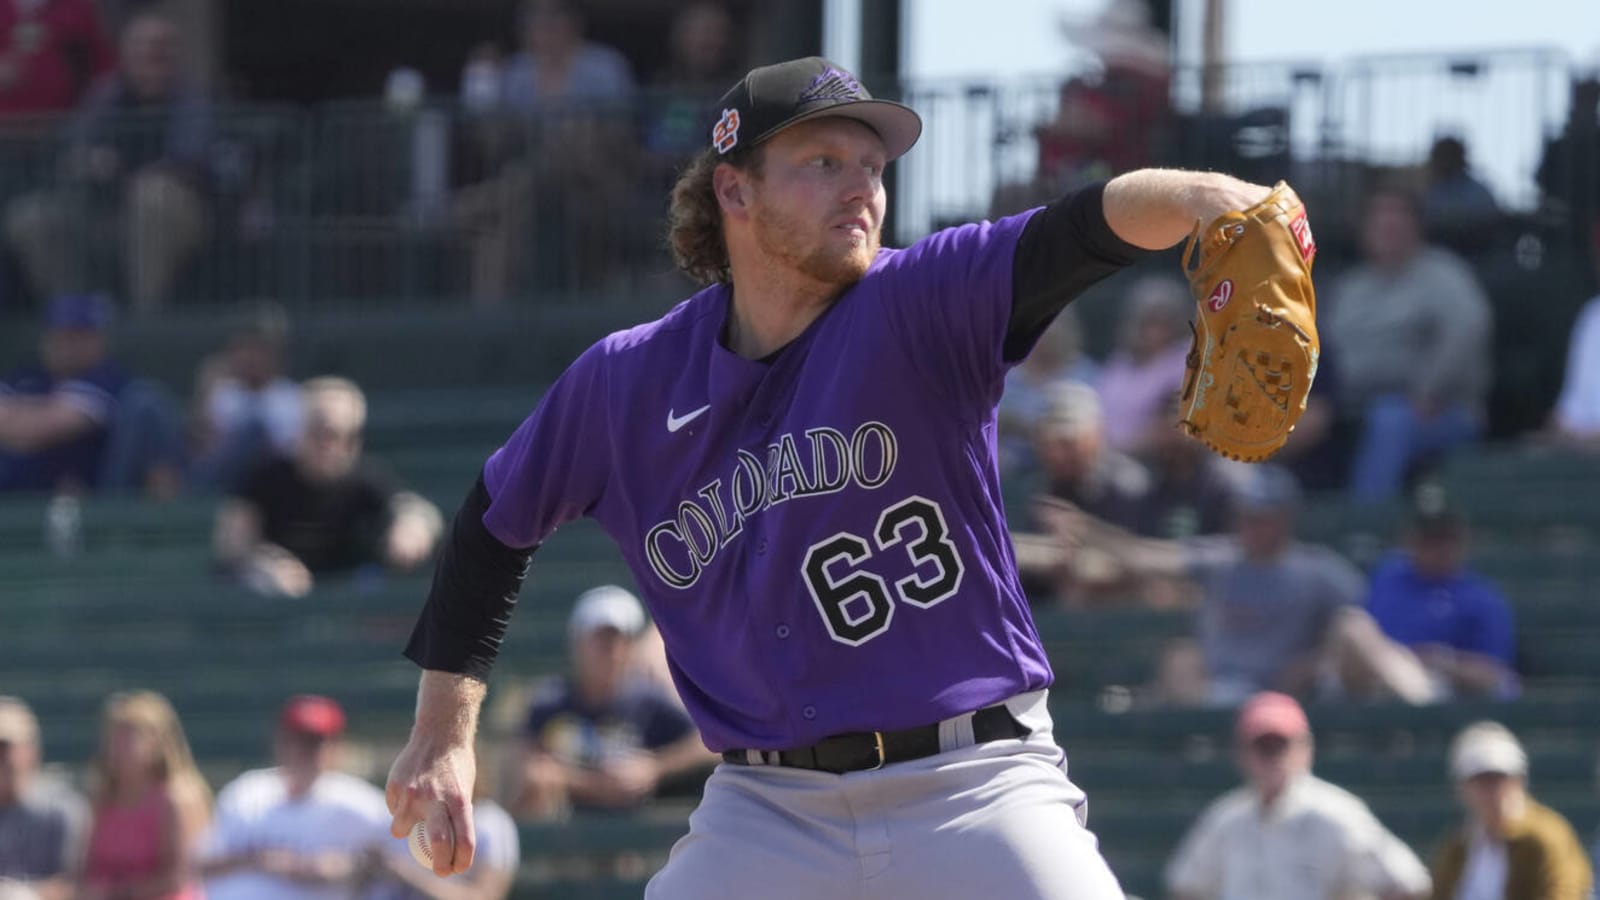 Watch: Rockies pitcher gets hat knocked off by comebacker in very close call